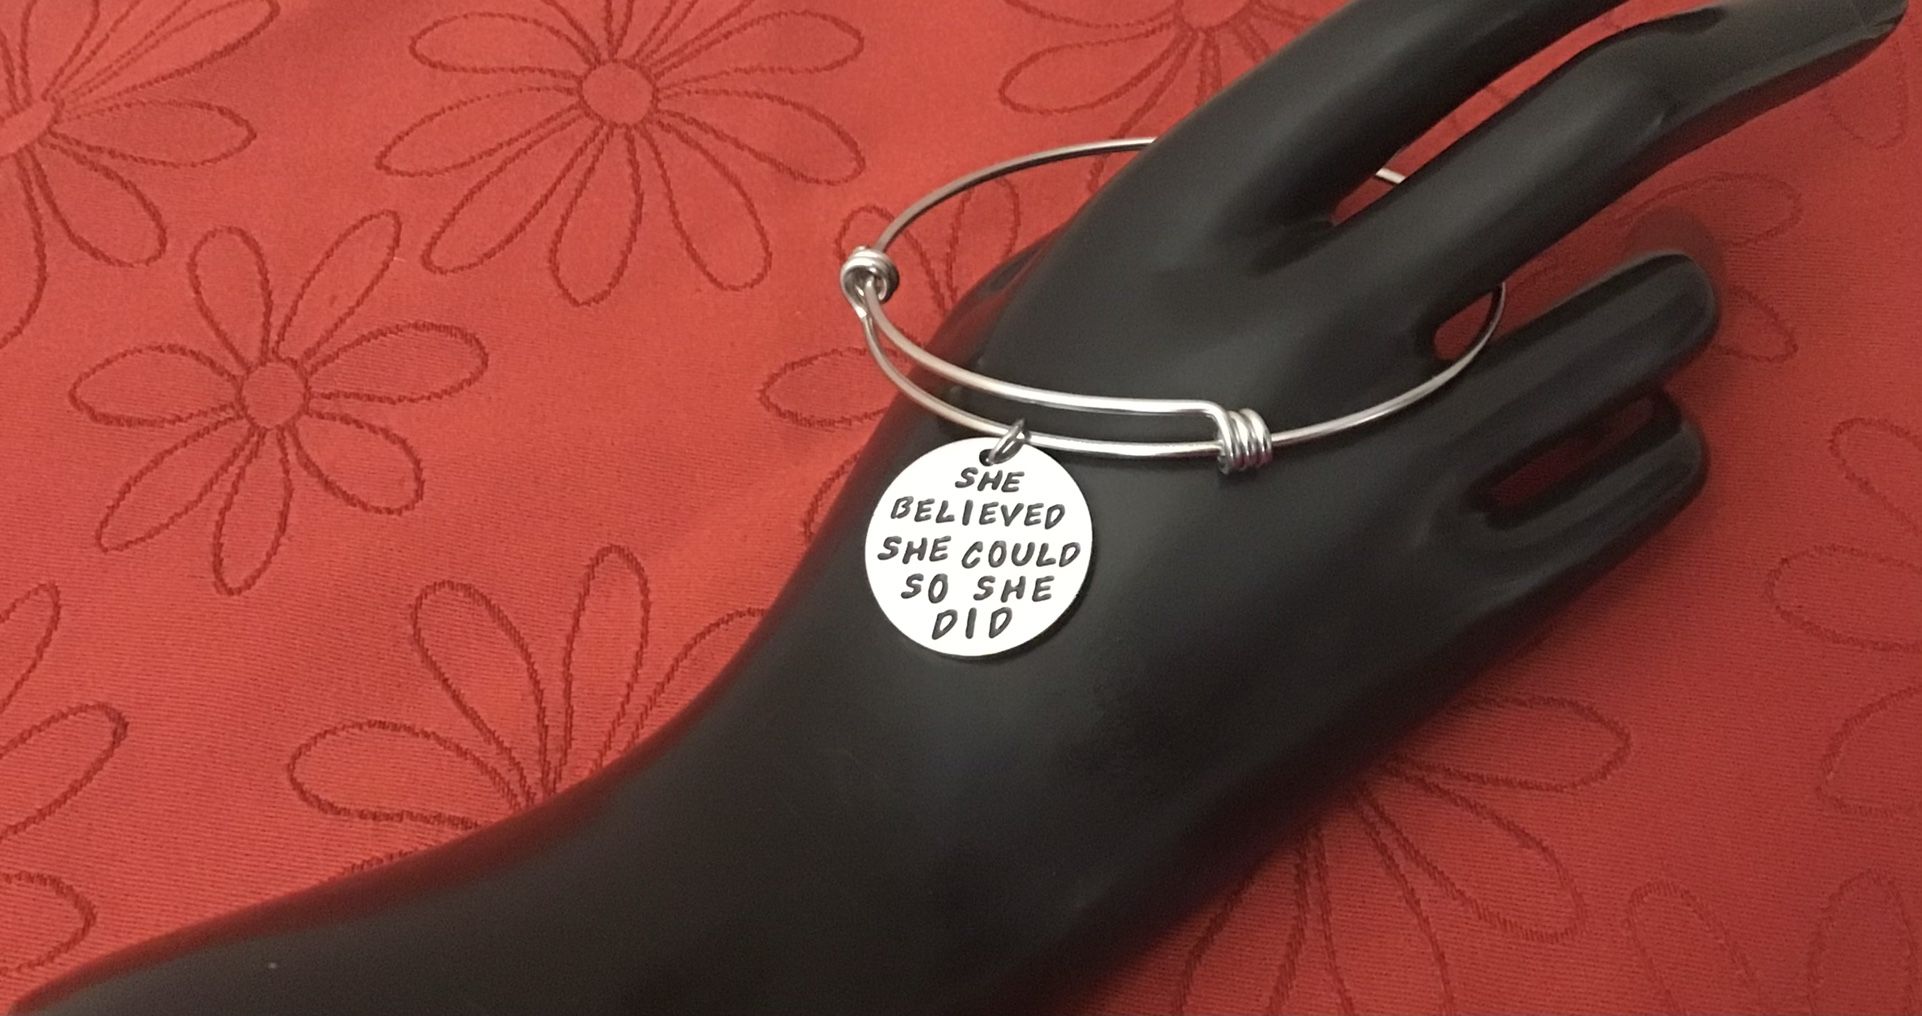 Inspirational Stainless Steel Bangle Bracelet, "She Believed She Could, So She Did". Expandable Bracelet. Size: 7.5 +